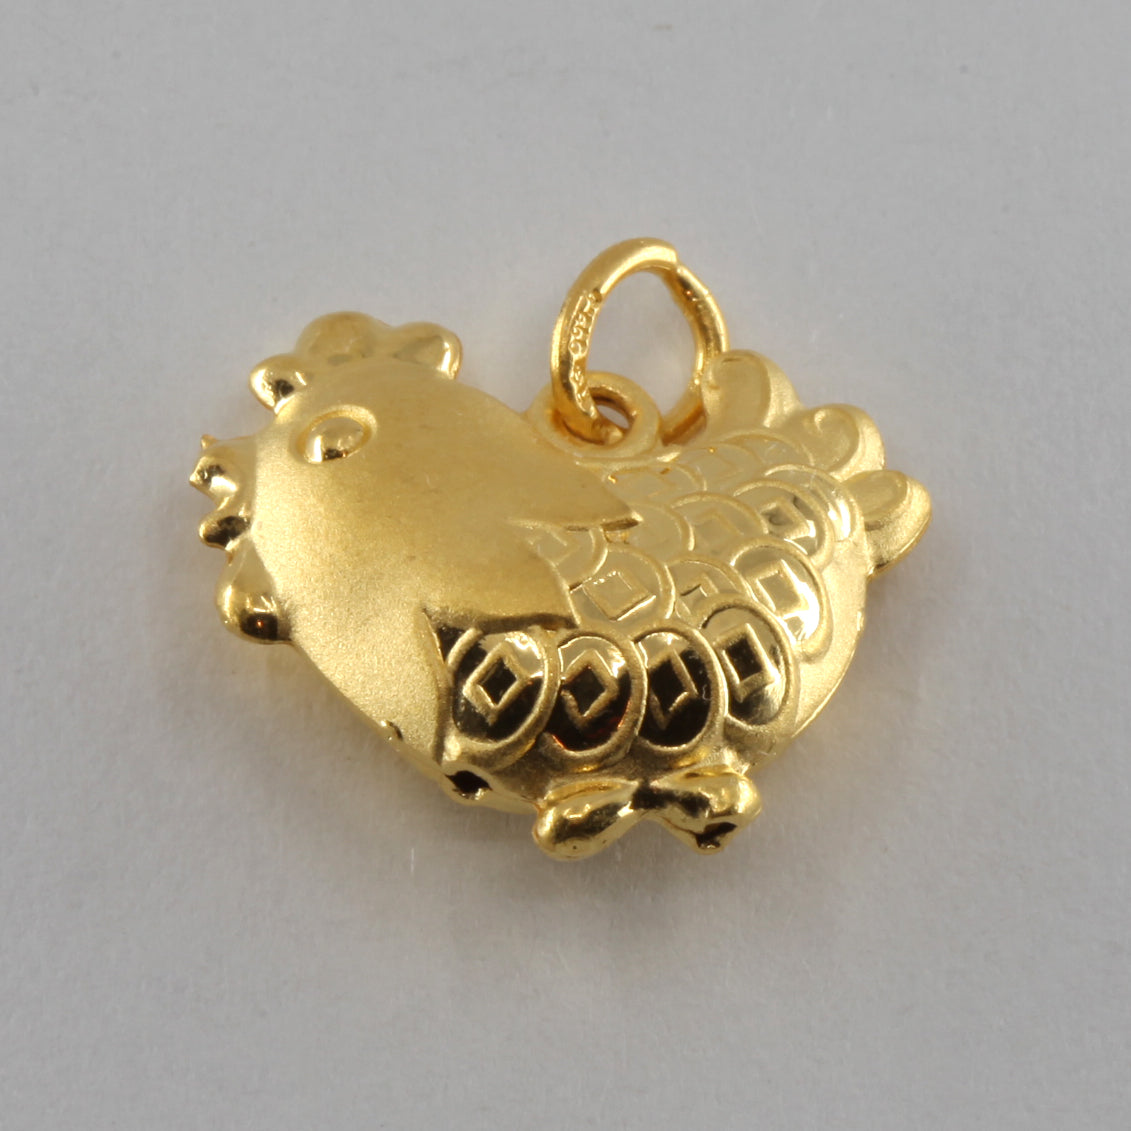 24K Solid Yellow Gold Puffy Rooster Chicken Hollow Pendant 3.0 Grams